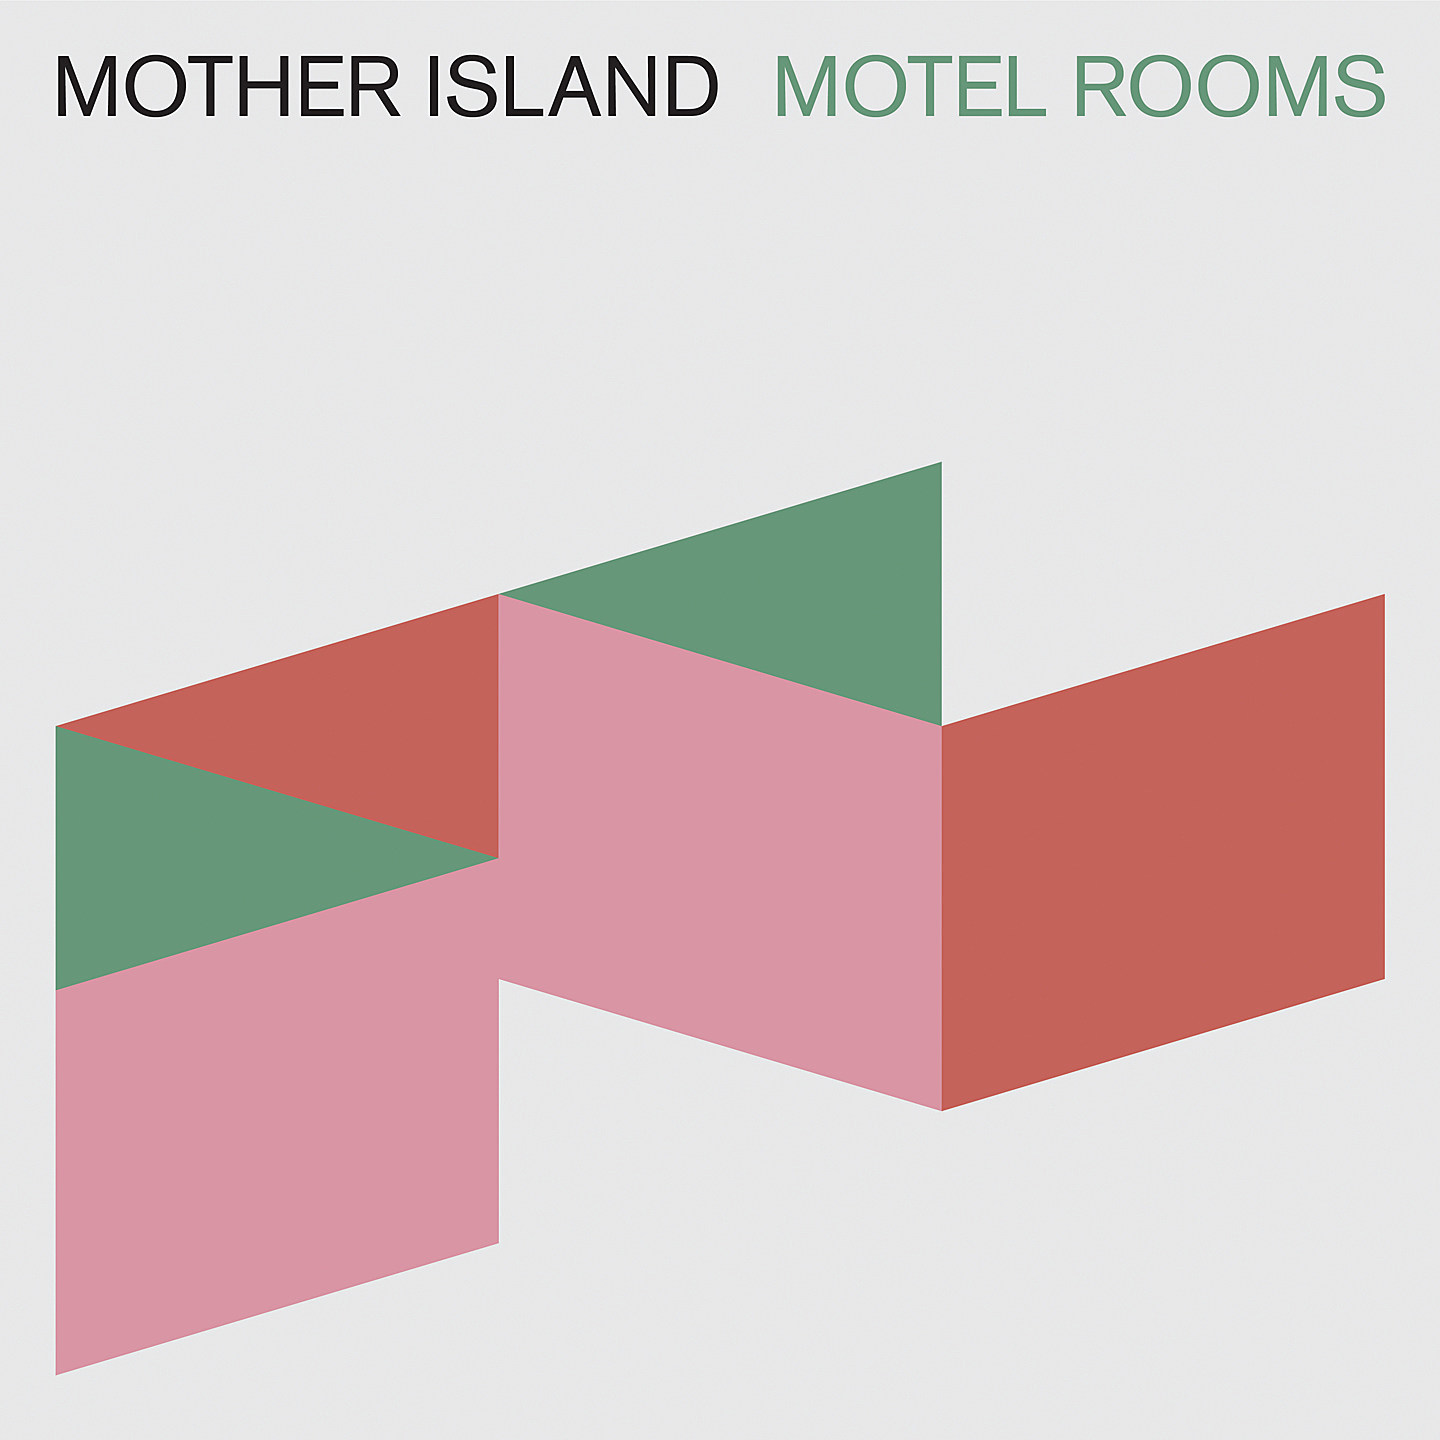 Mother Island Motel Rooms